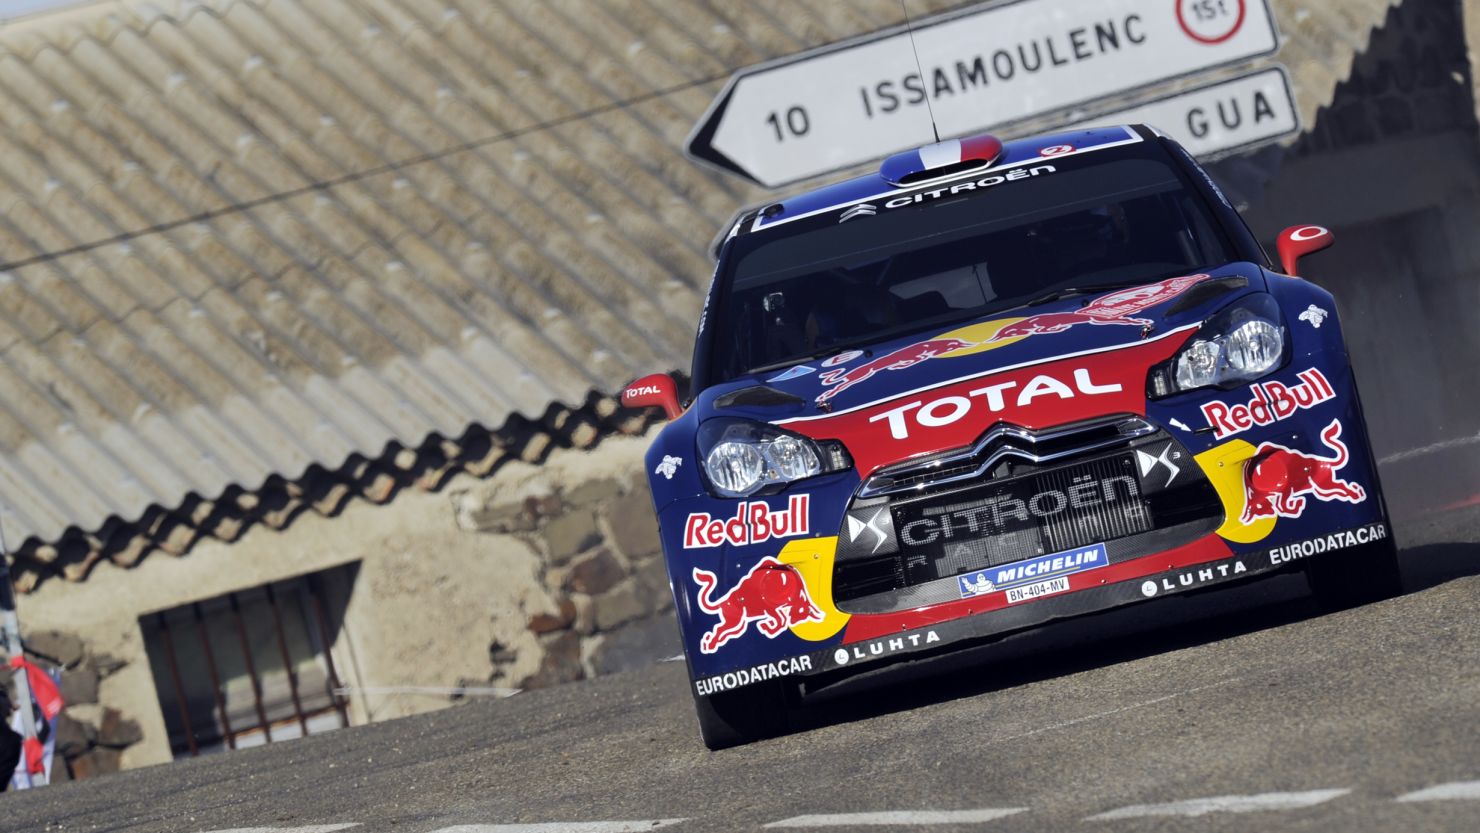 Sebastien Loeb is now over a minute-and-a-half ahead of second placed Dani Sordo in Monte Carlo.